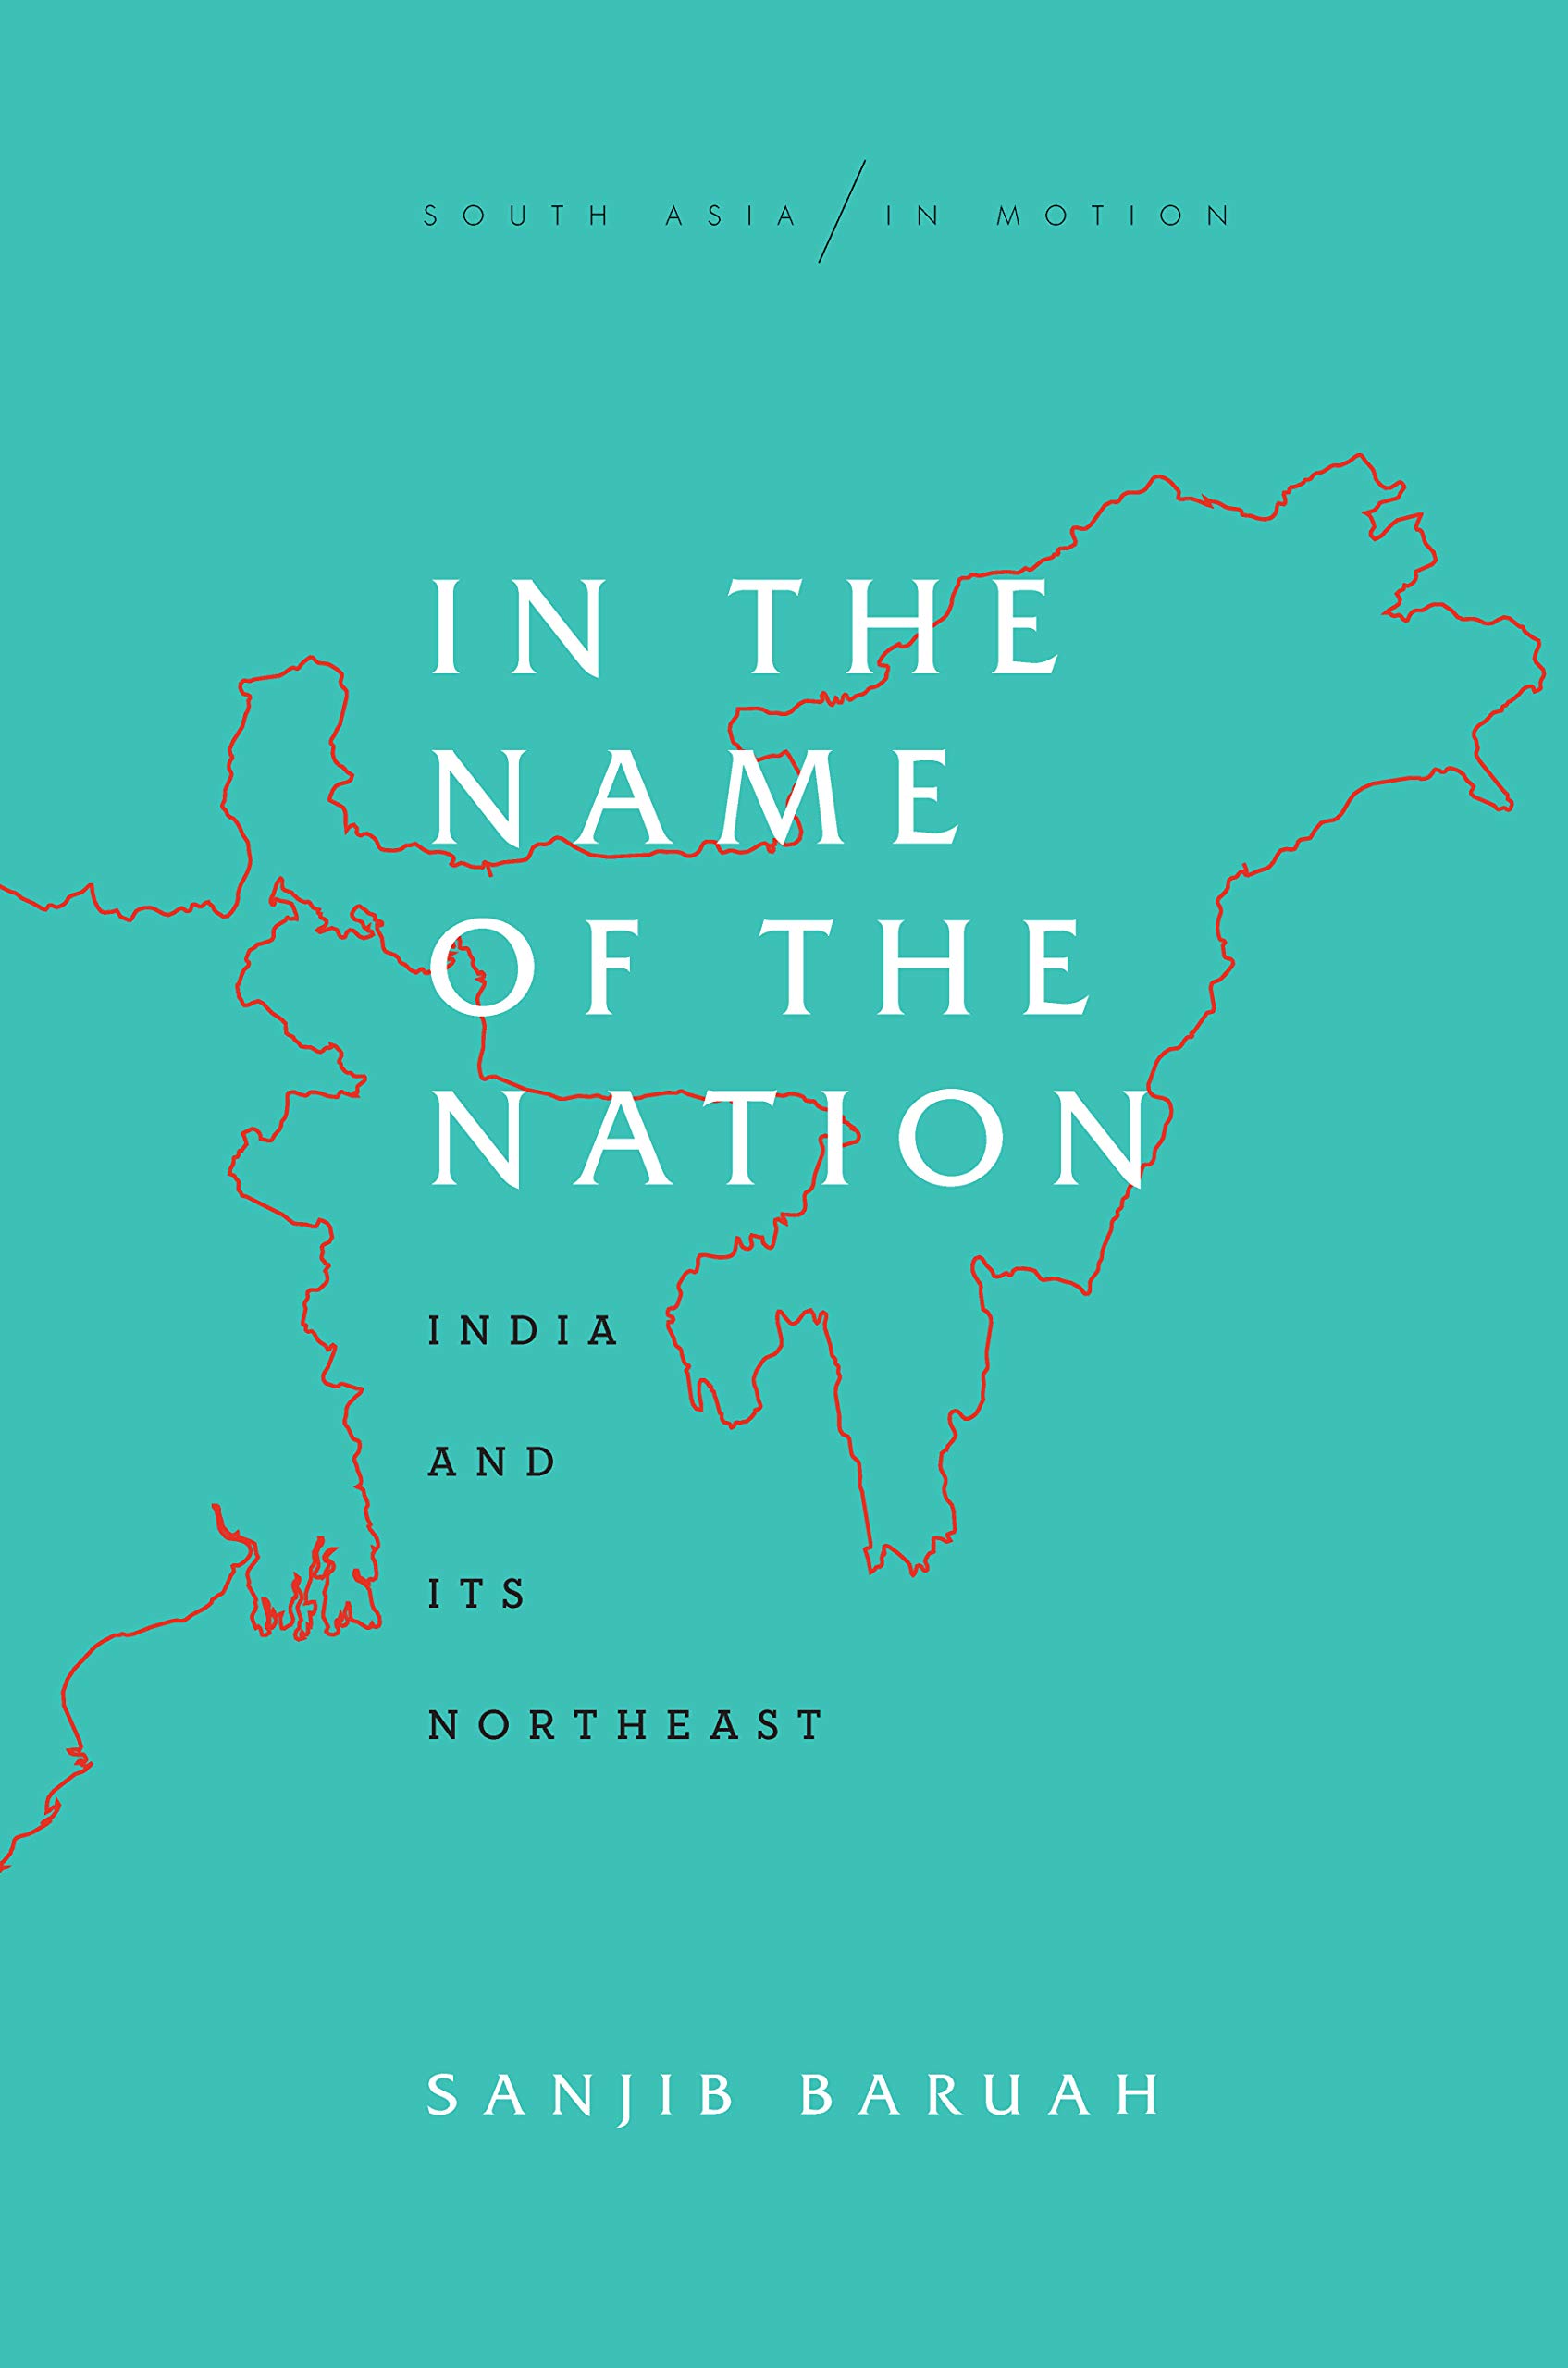 In the name of the nation: India and its Northeast by Sanjib Baruah, Stanford, $30